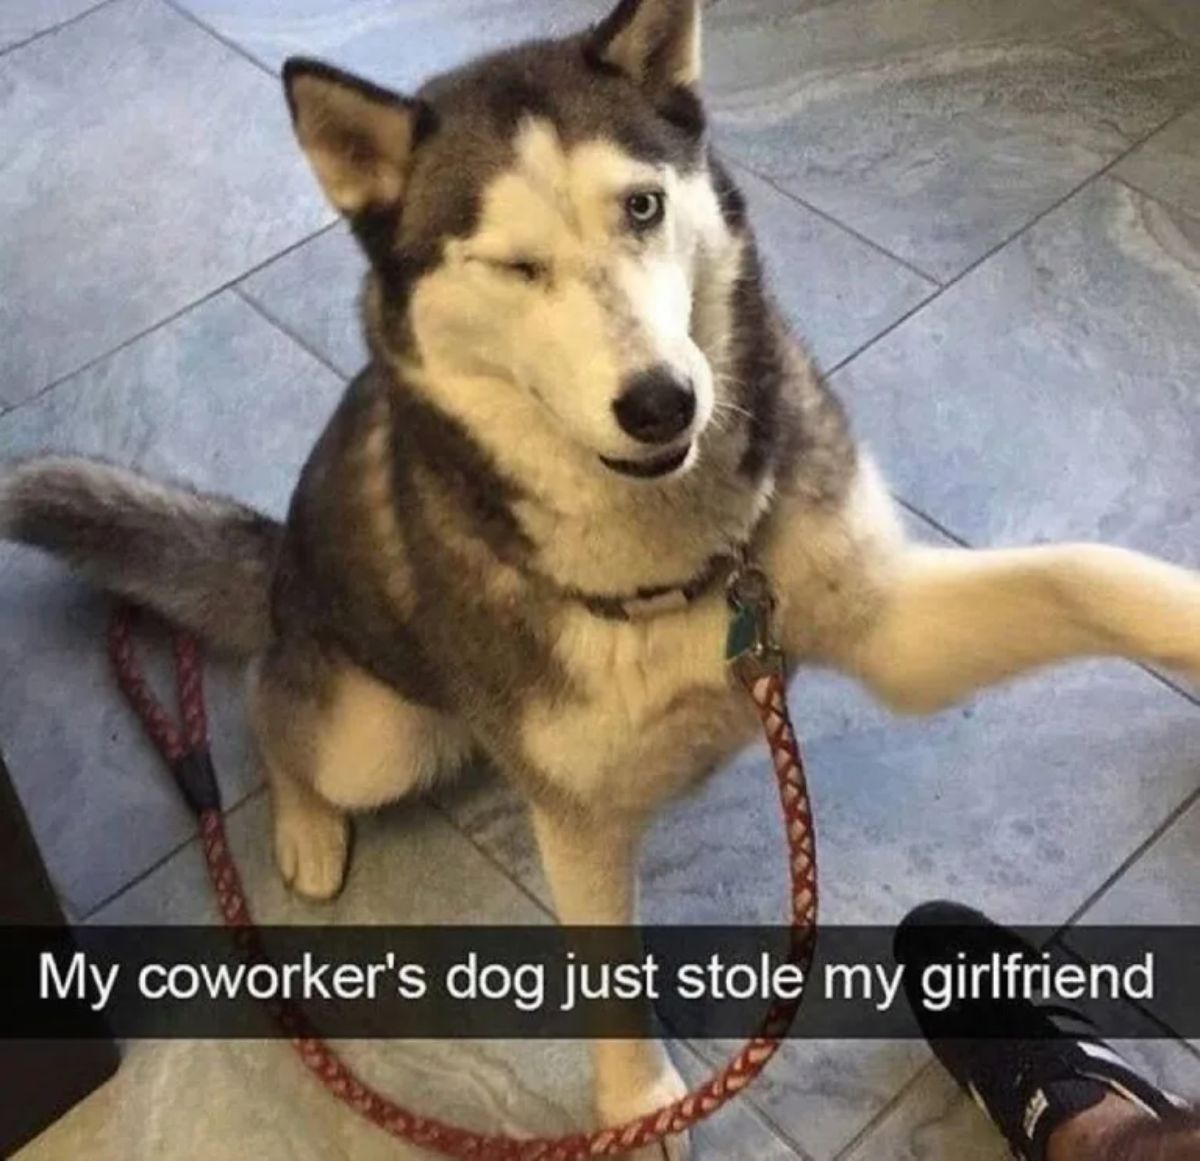 black and white husky sitting on the floor winking with the caption My coworker's dog just stole my girlfriend